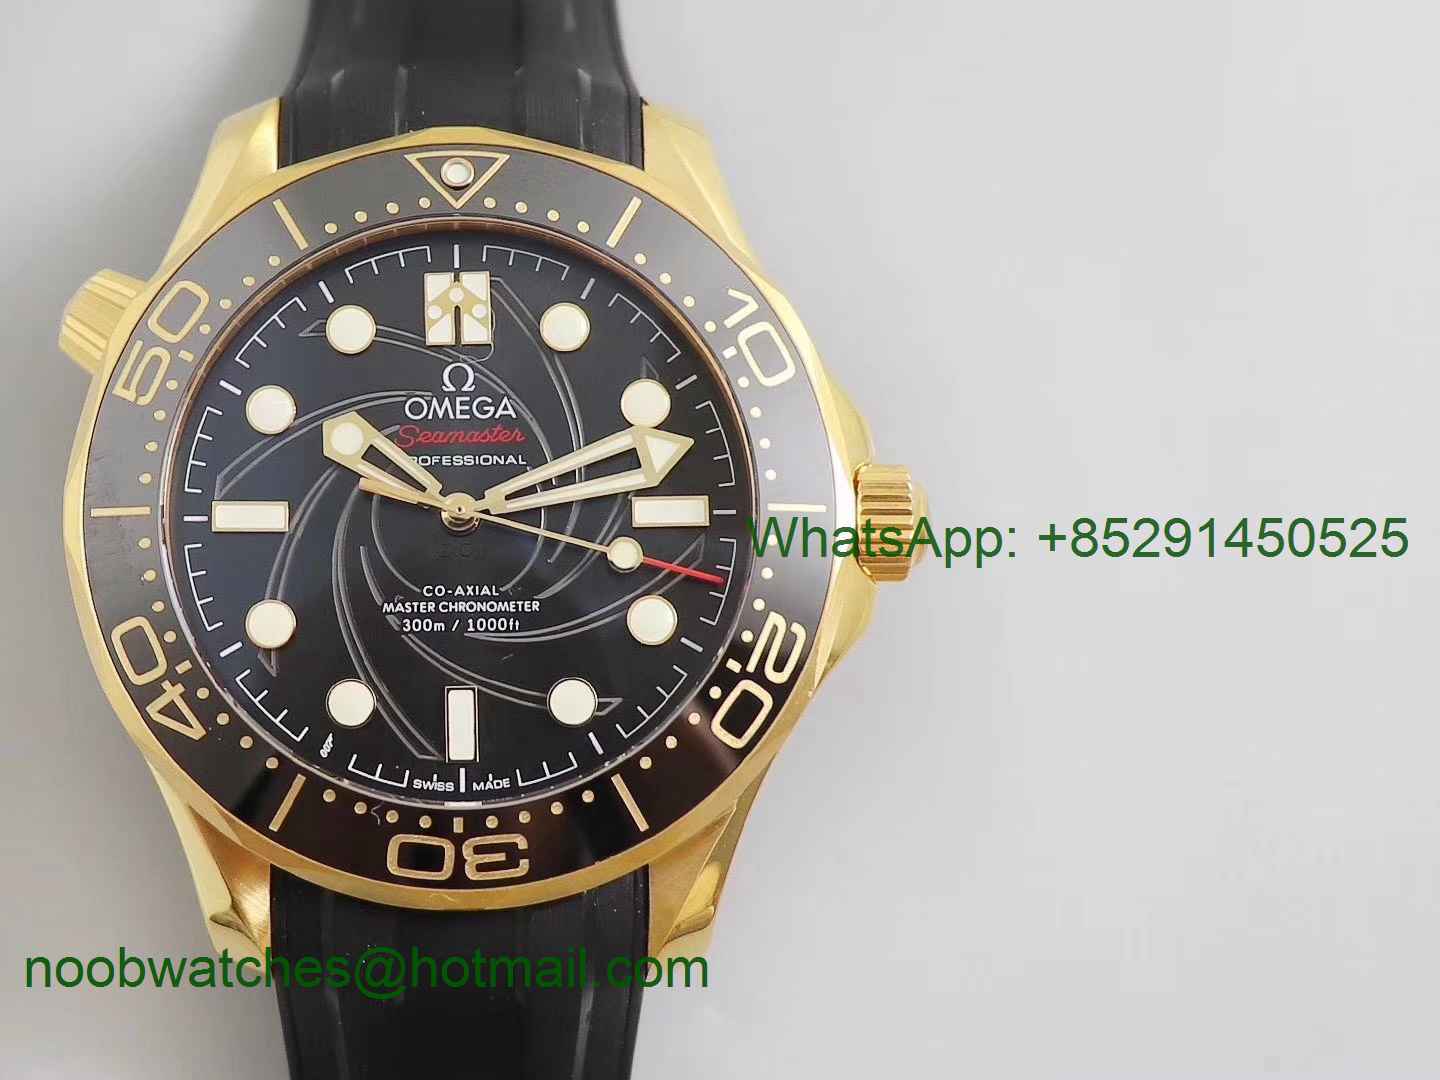 Replica OMEGA Seamaster Diver 300M Yellow Gold 007 James Bond VSF 1:1 Best Edition on Black Rubber Strap A8807